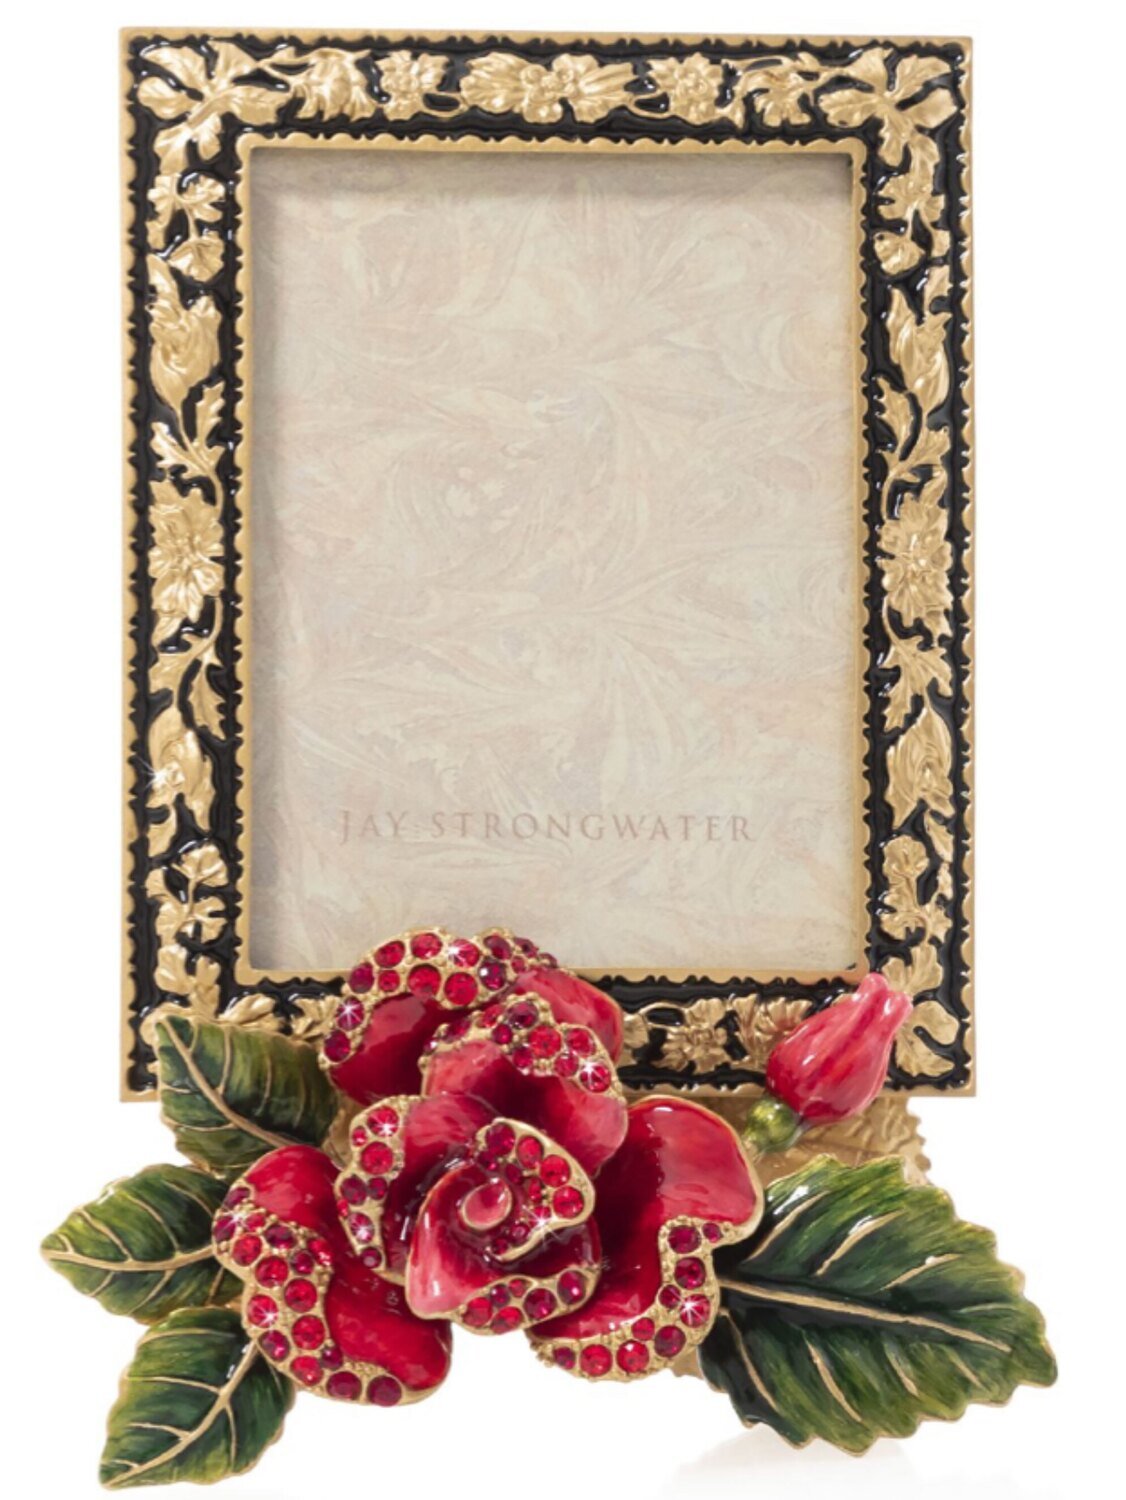 Jay Strongwater Rylee 5 x 7 Night Bloom Rose Picture Frame SPF5868-250